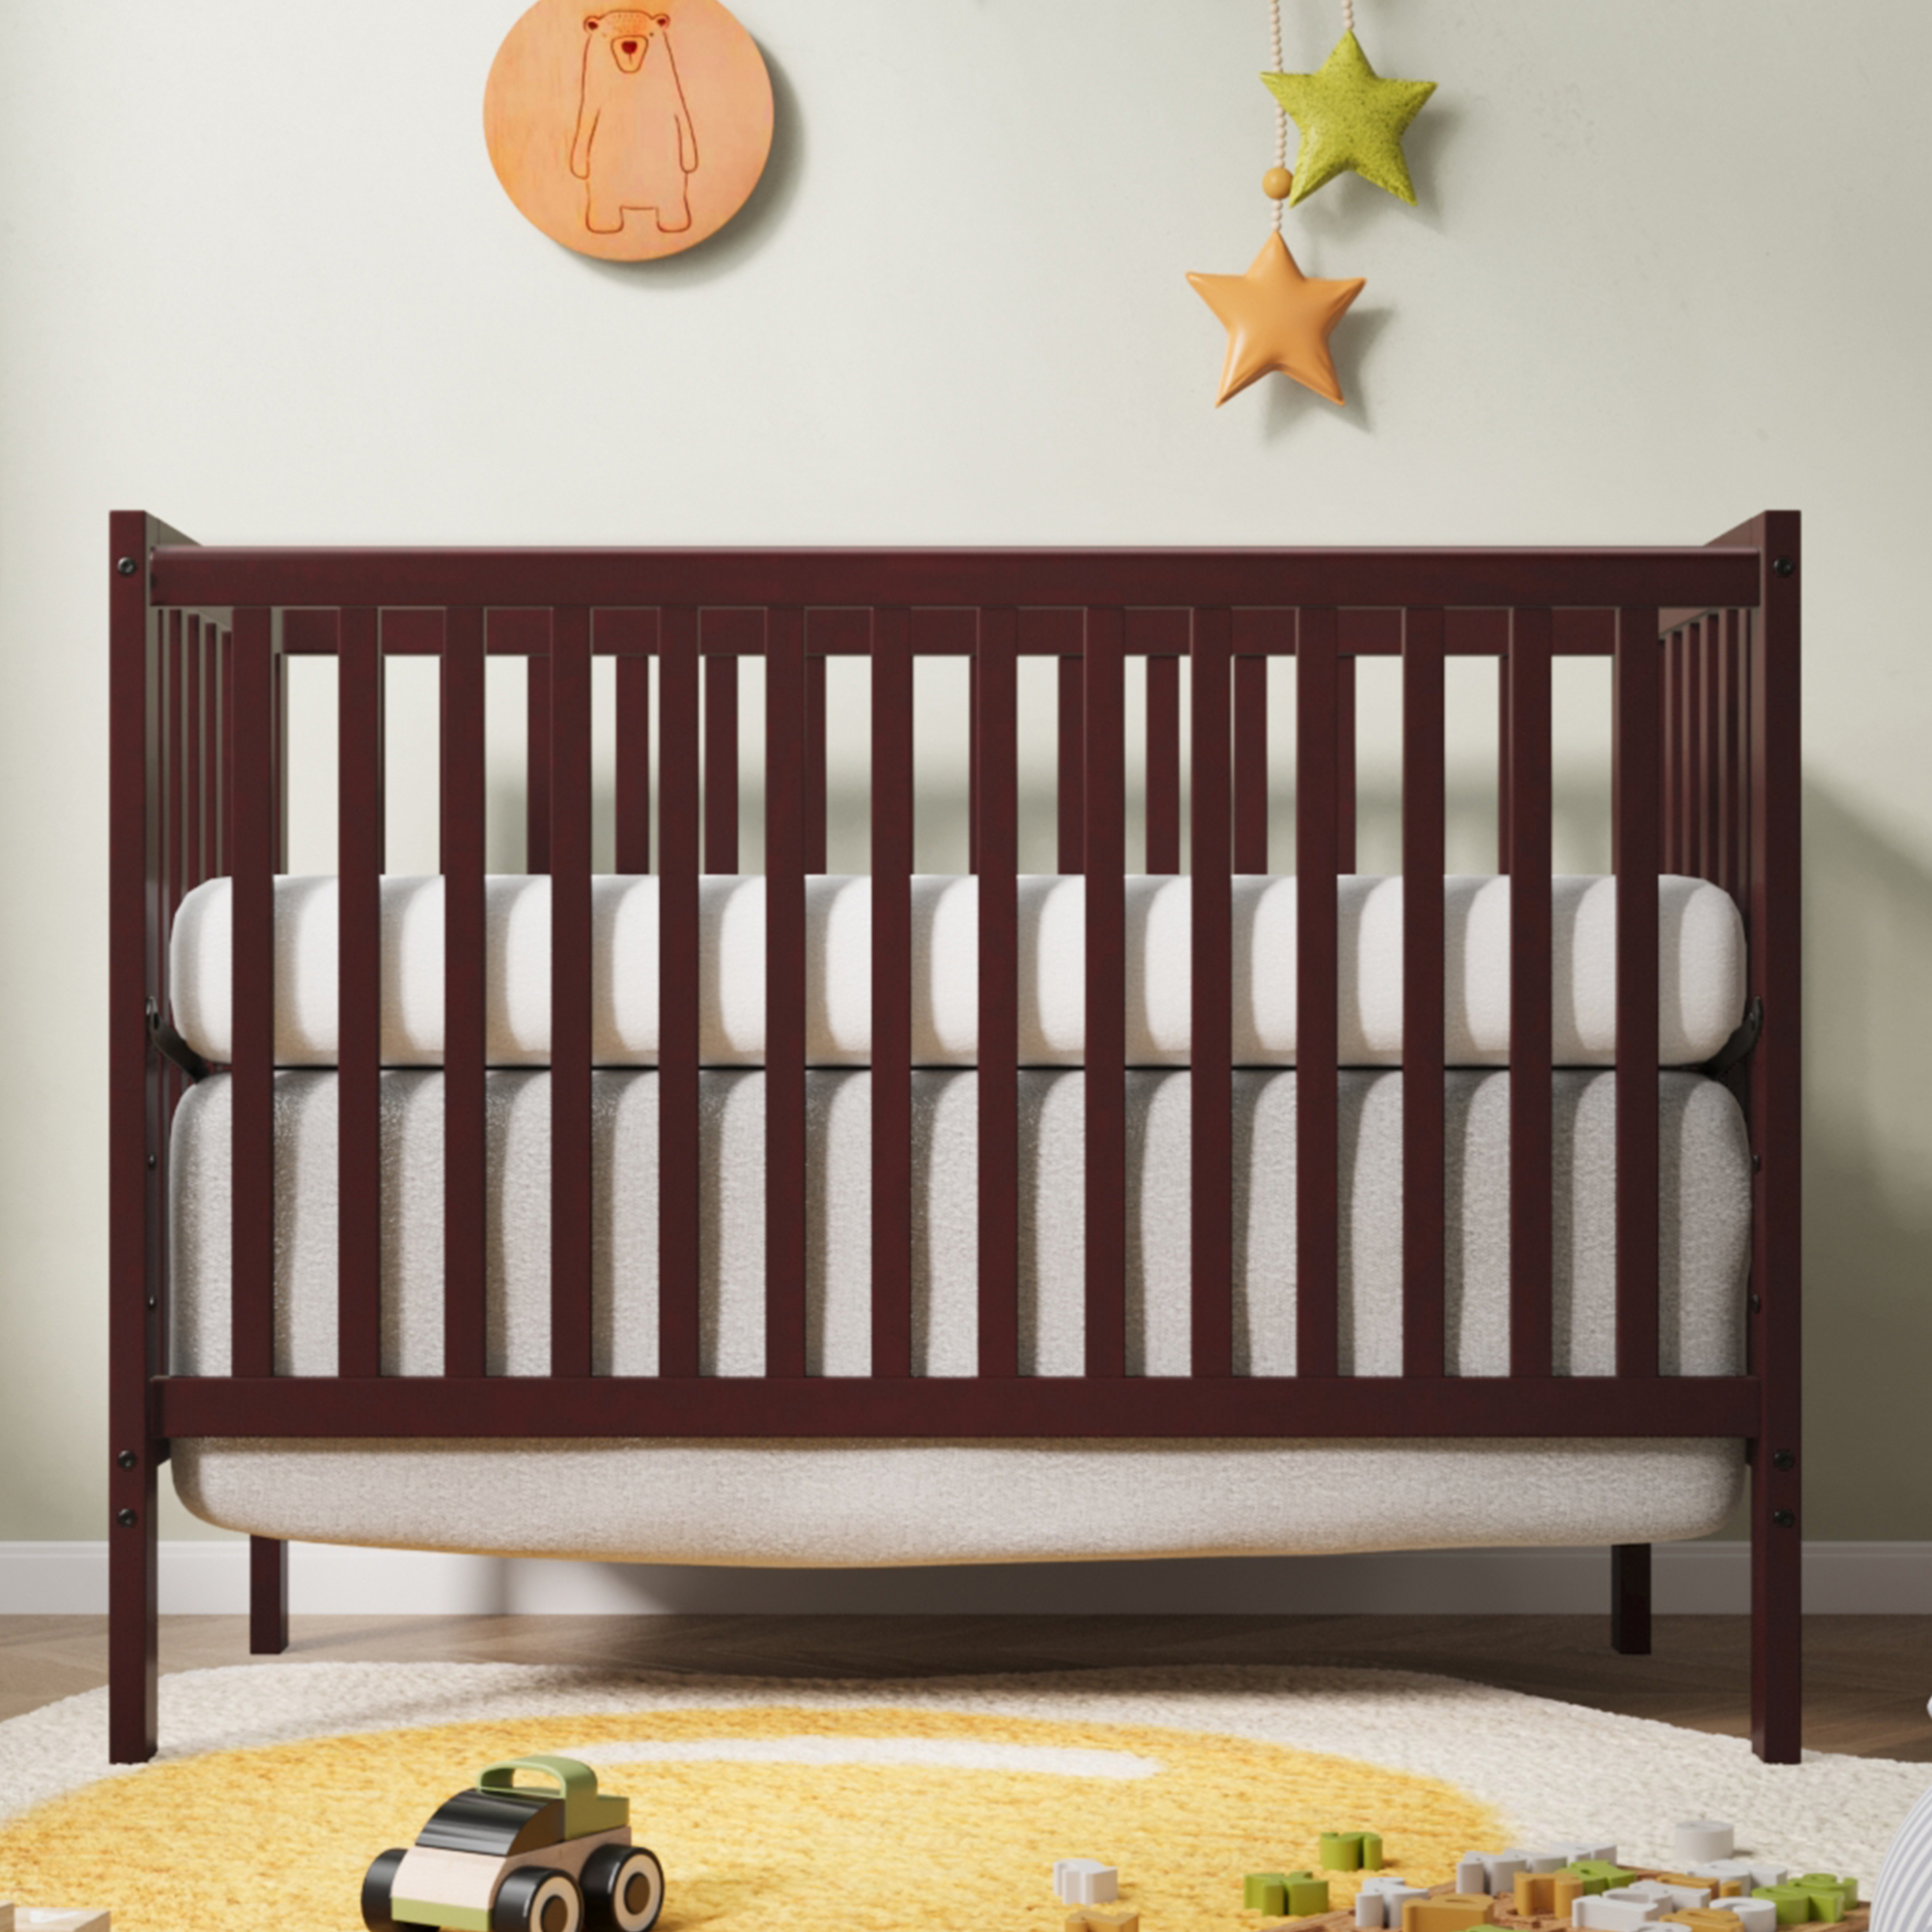 Sesslife 5-In-1 Convertible Crib, Baby Bed, Converts from Baby Crib to Toddler Bed, Fits Standard Full-Size Crib Mattress ,Easy to Assemble(Espresso) - image 1 of 11